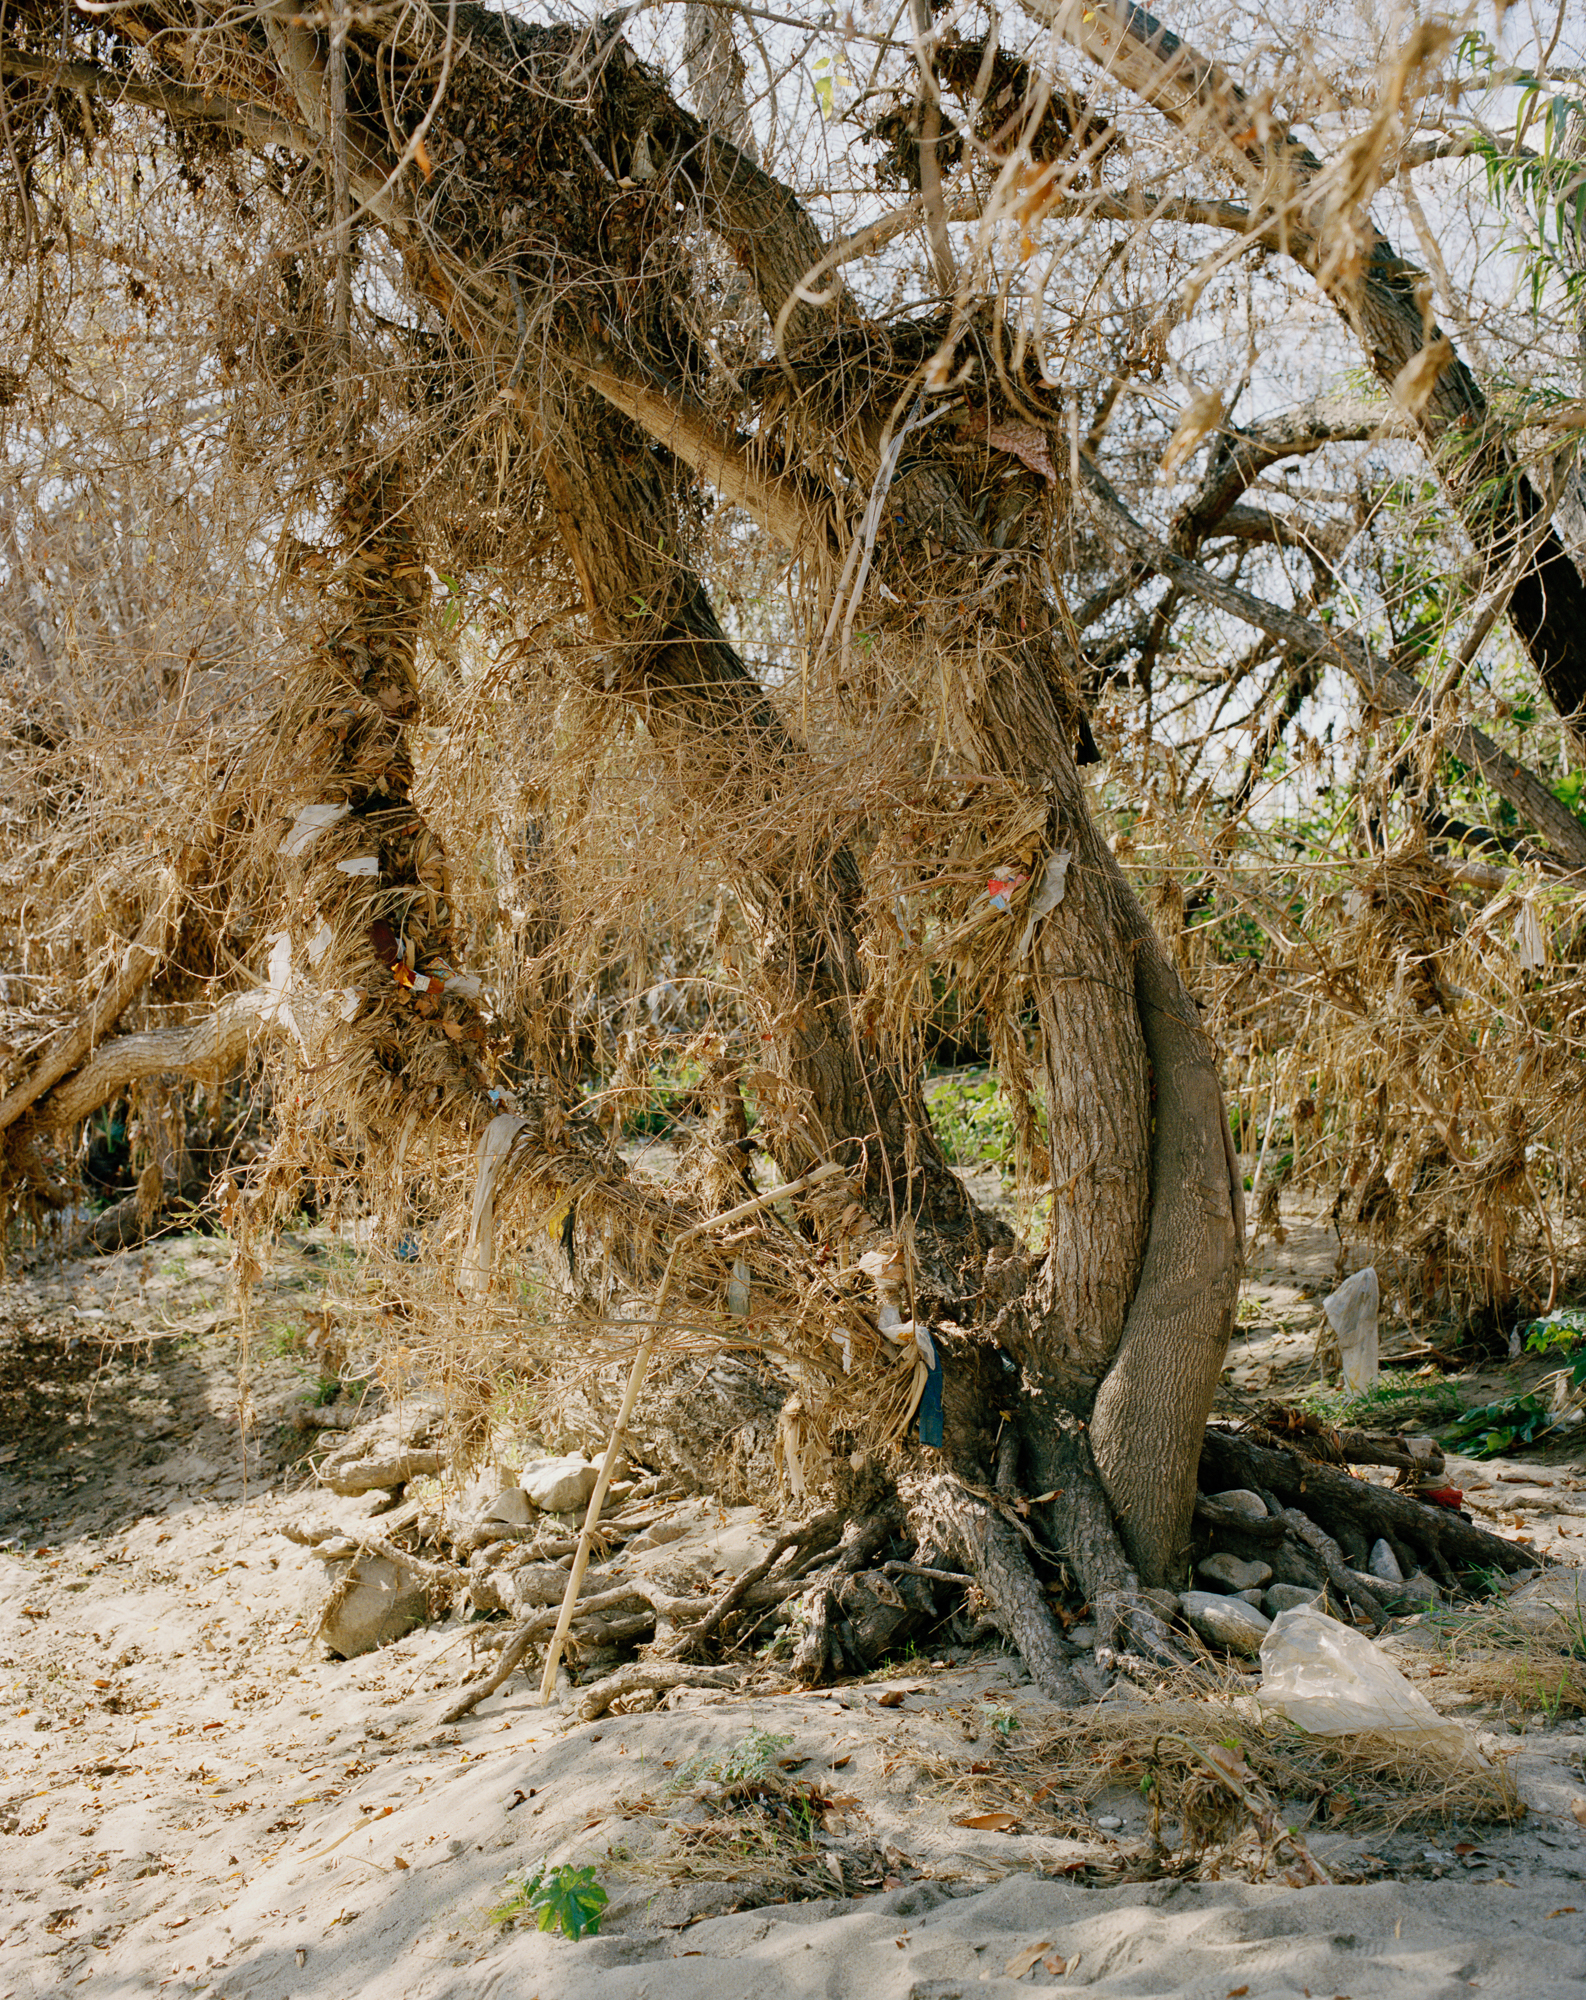 A tree draped in garbage after a rainstorm floods the river - Glassell Park, 2015